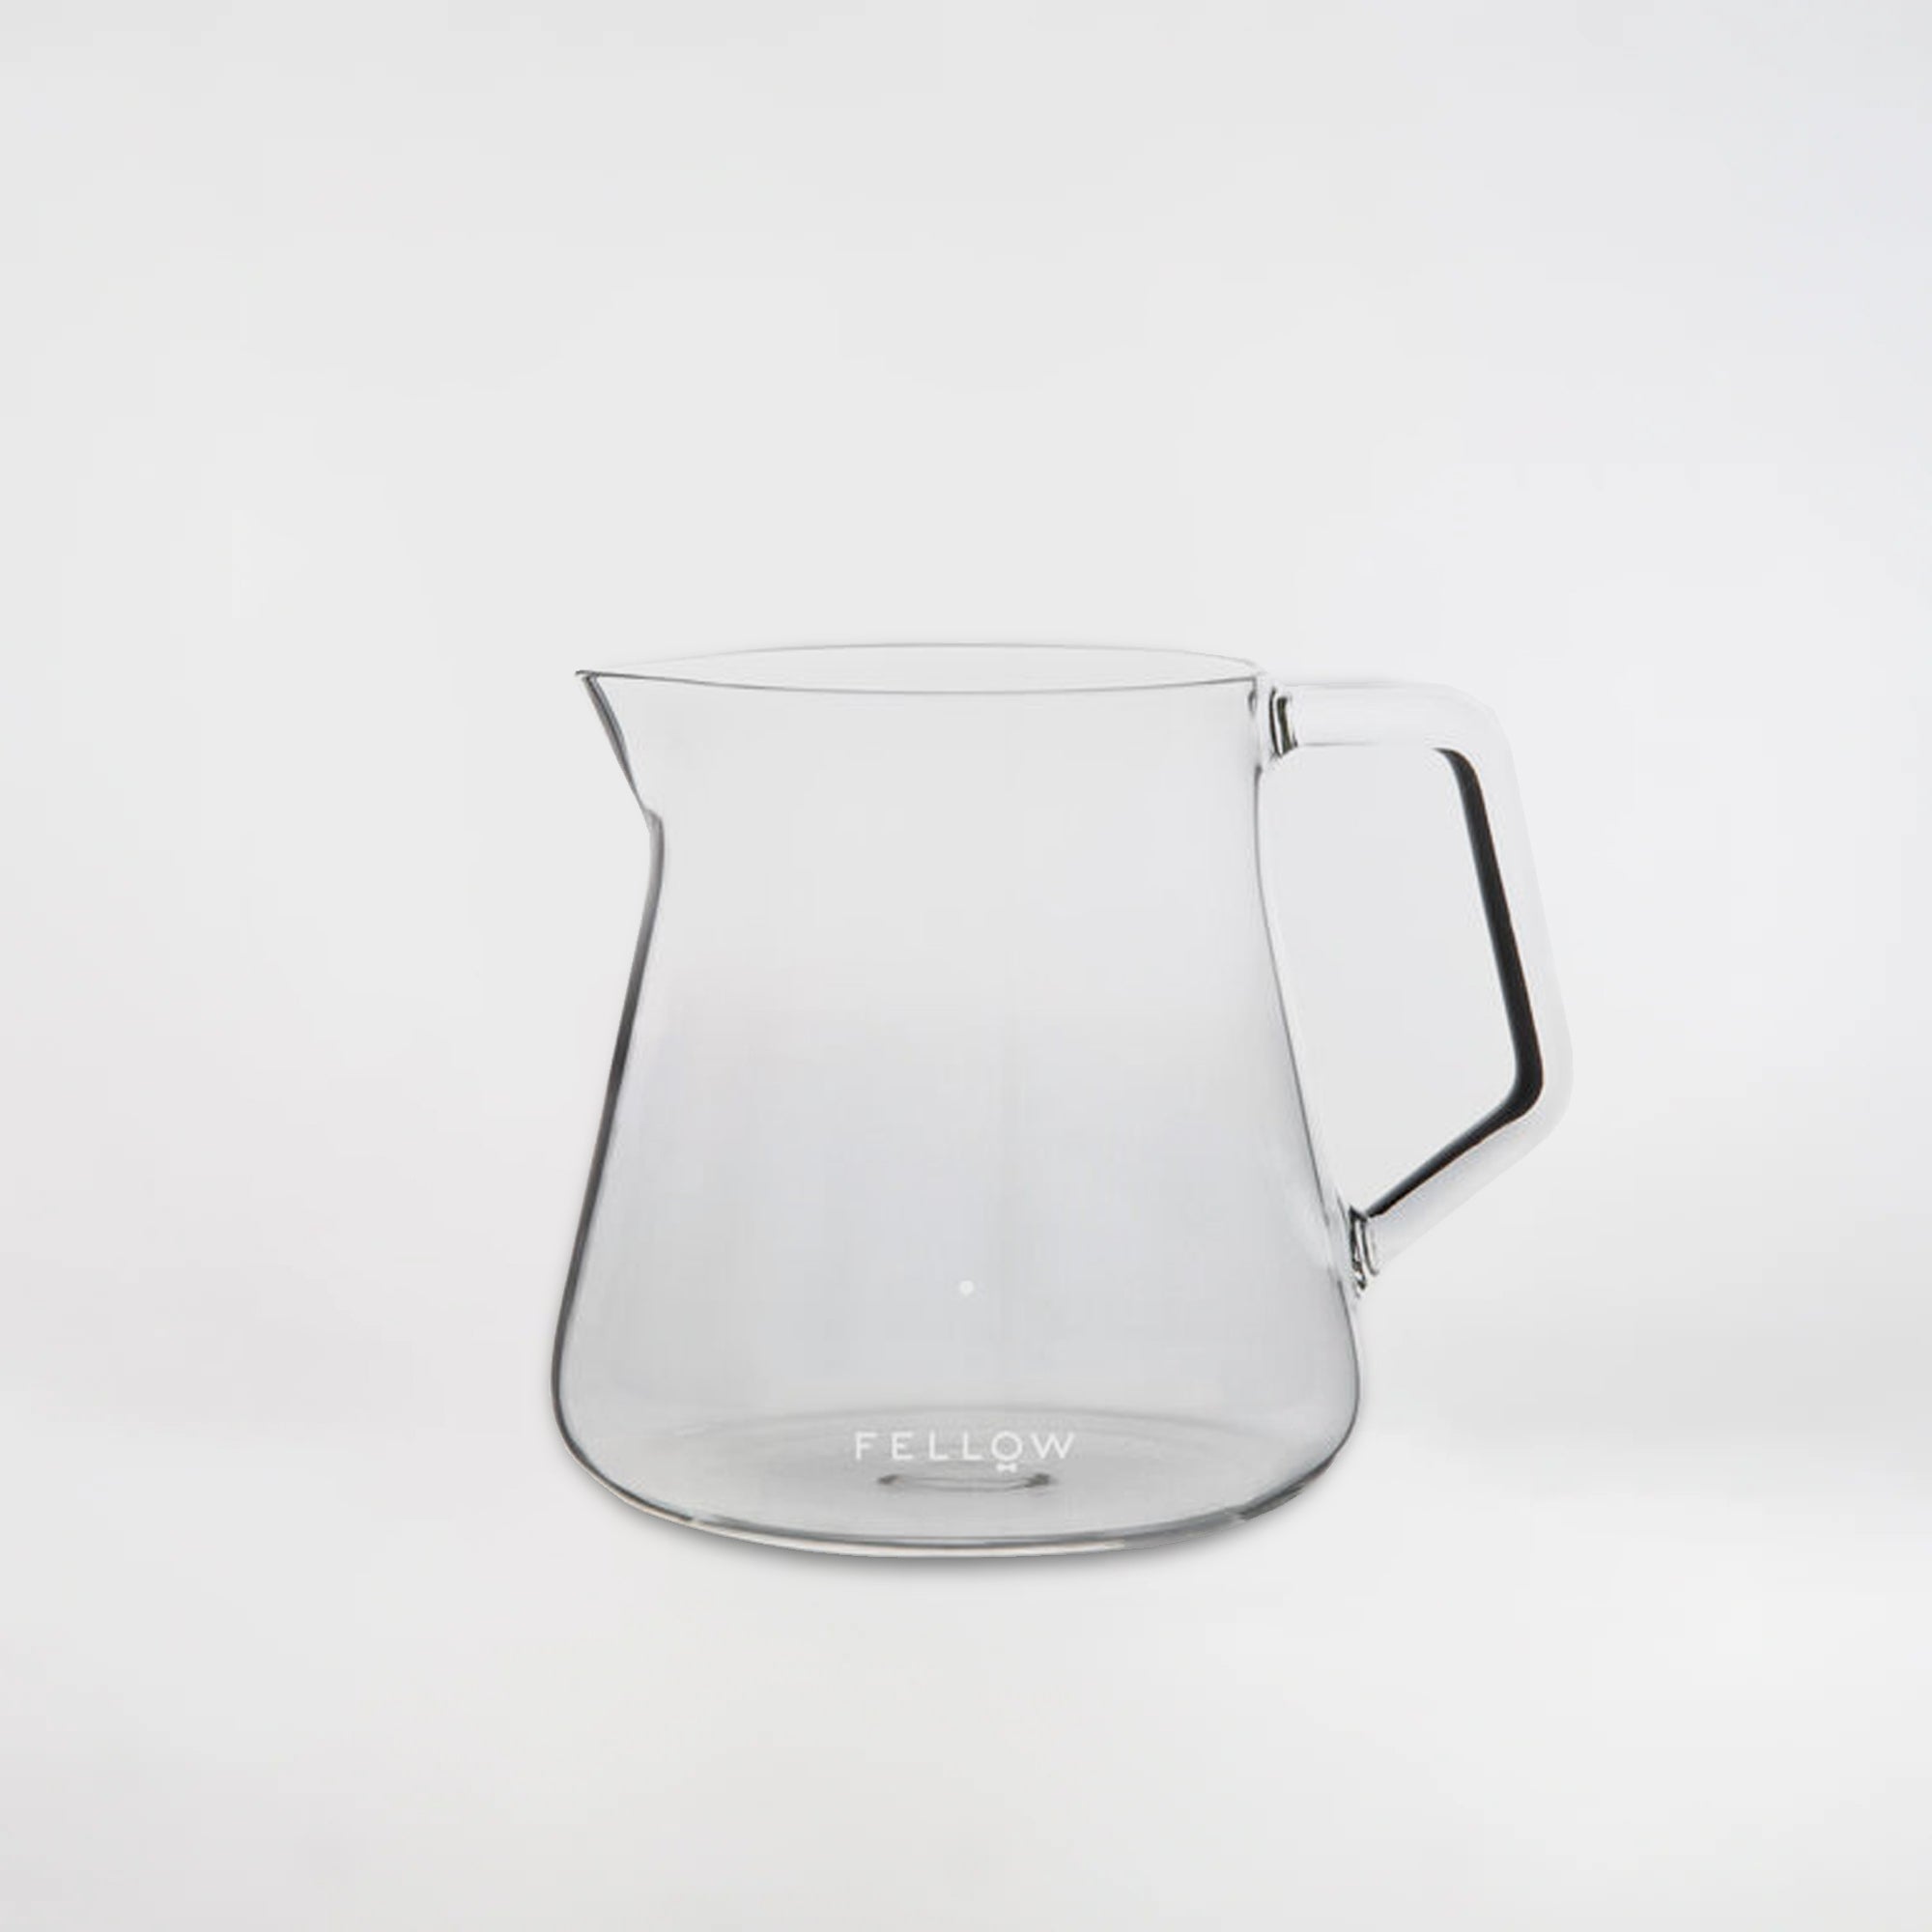 Mighty small glass carafe - Fellow